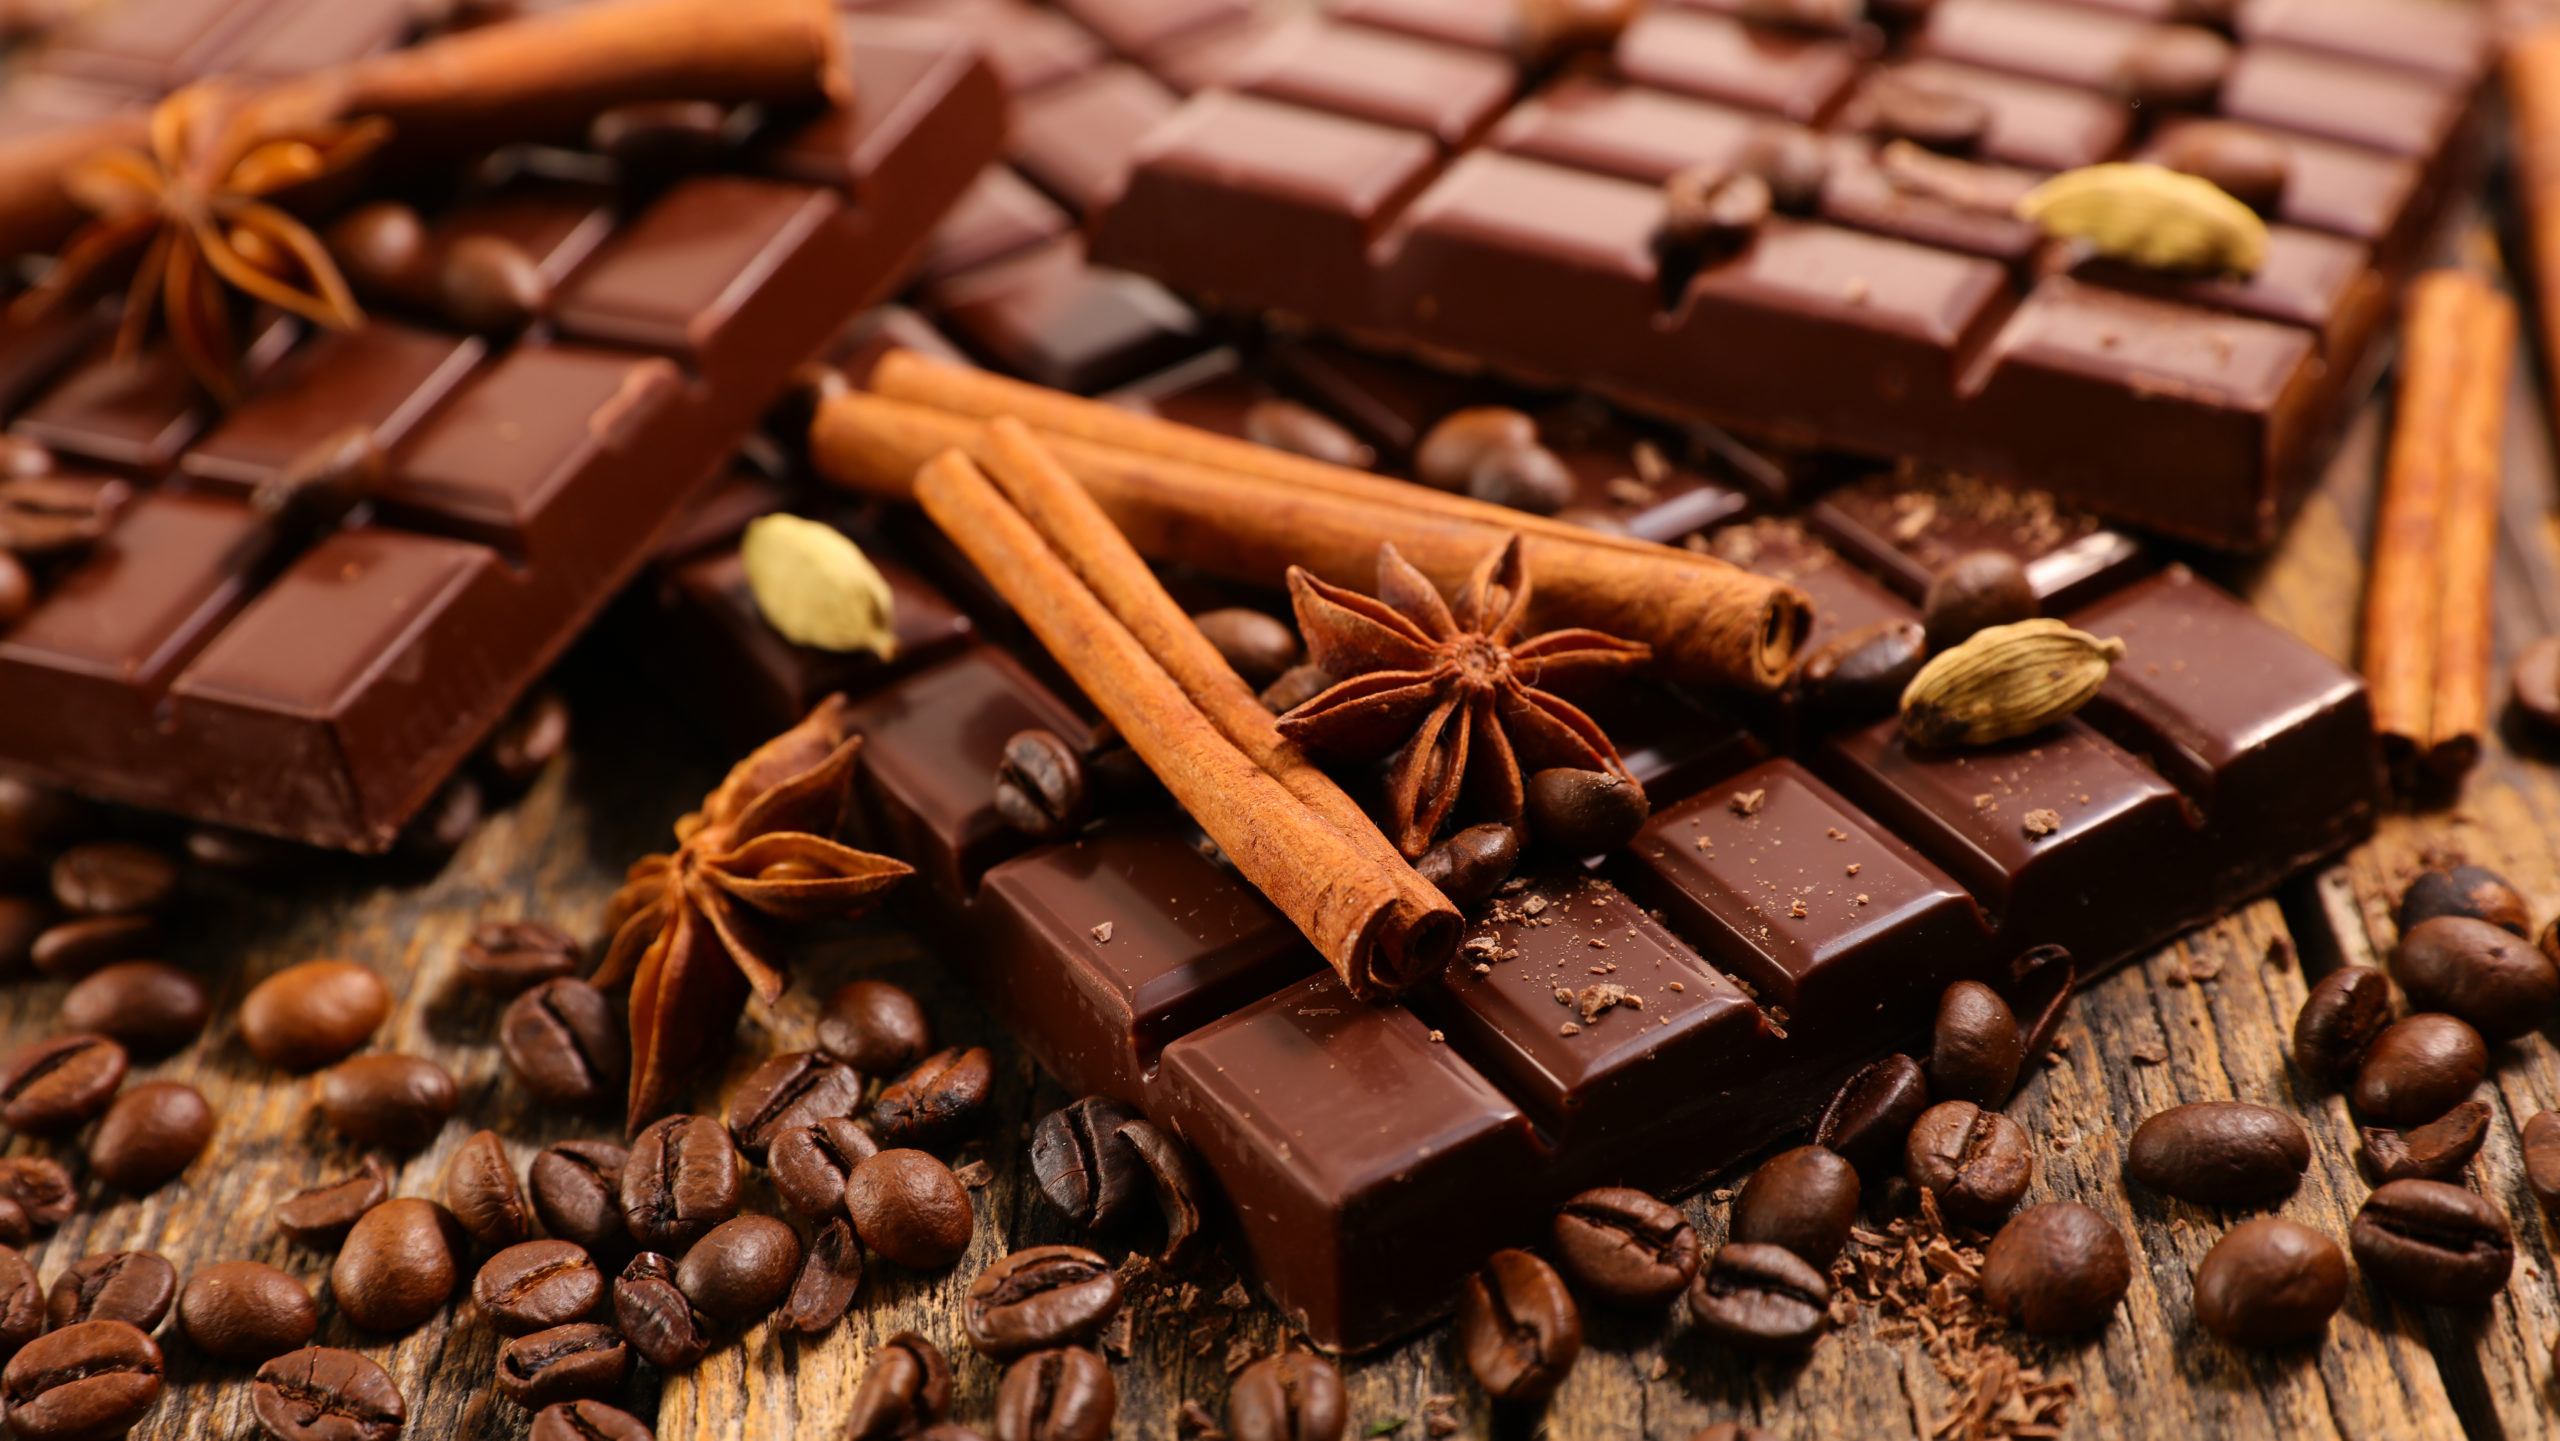 chocolate bars and spices